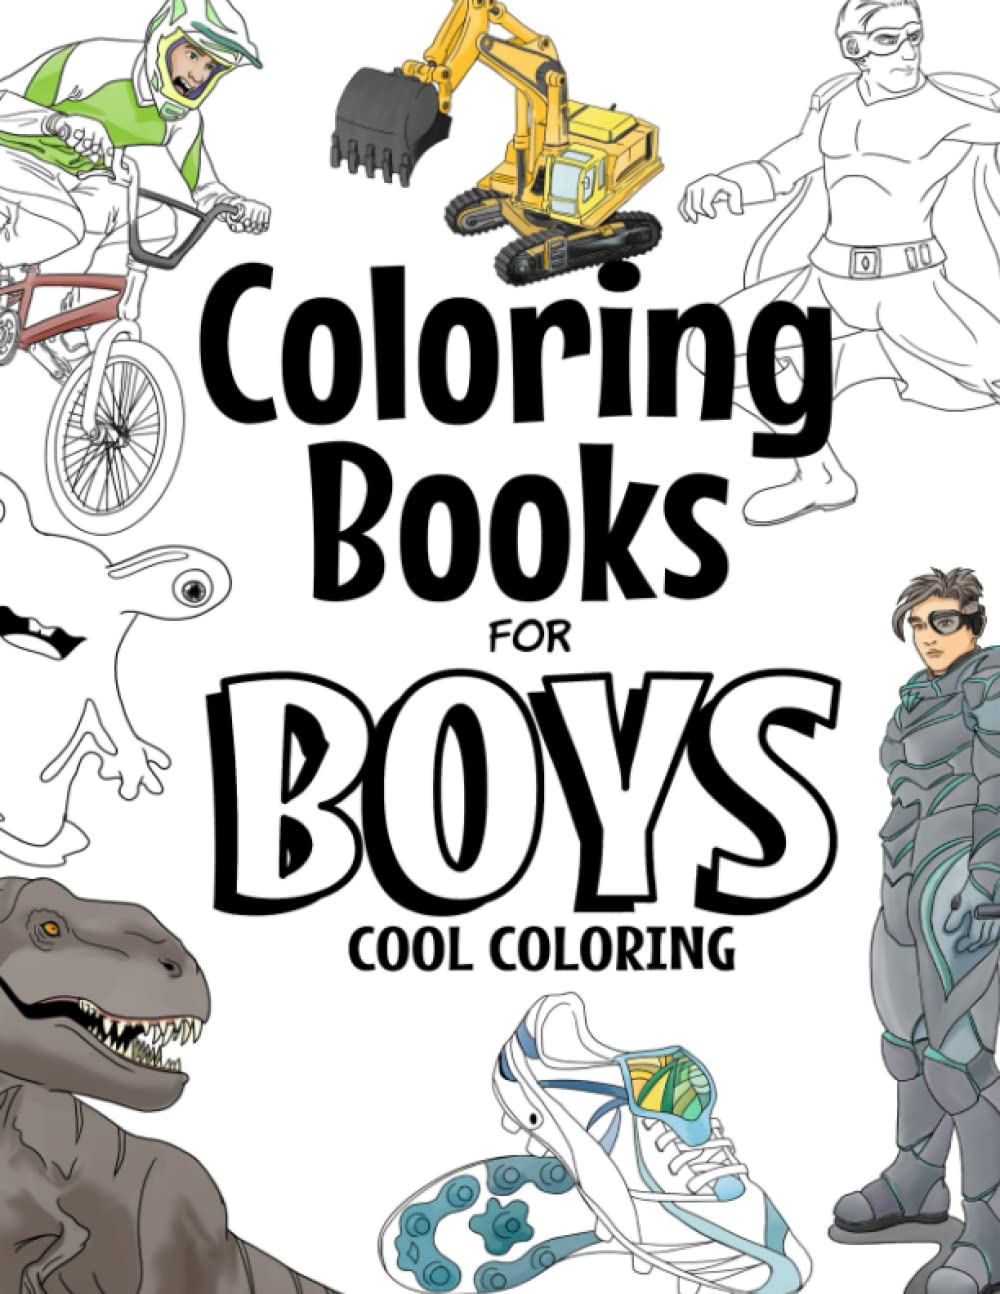 Coloring Books For Boys